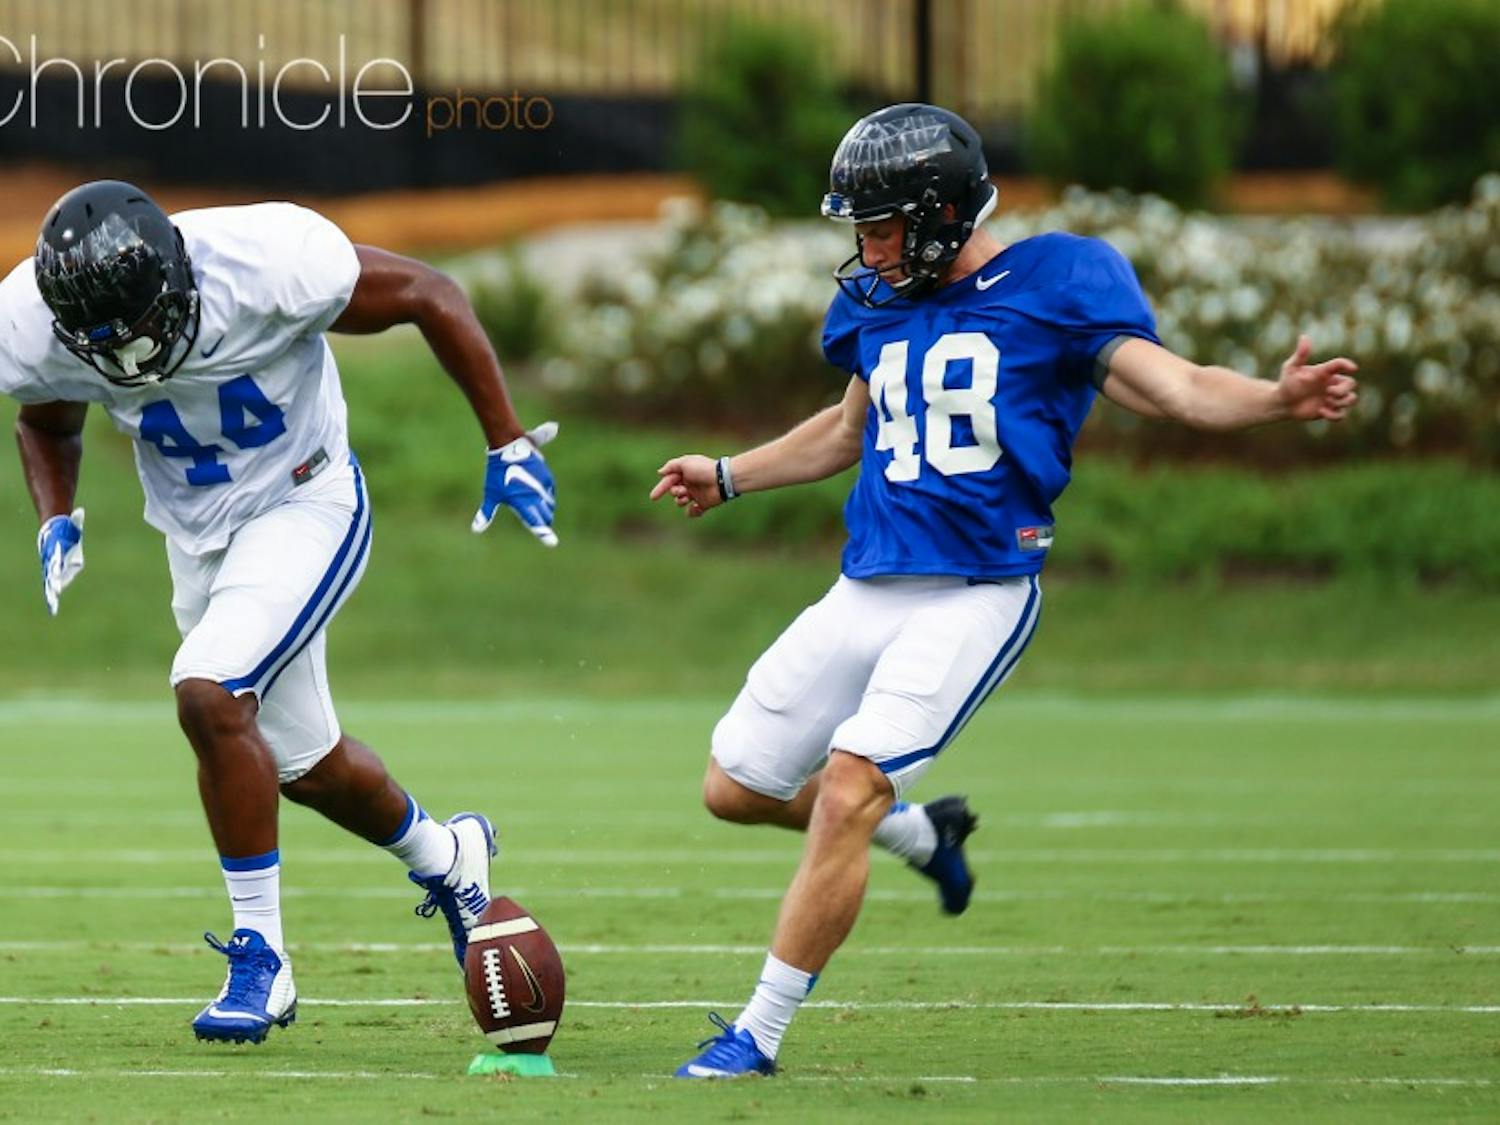 True freshman A.J. Reed is expected to be Duke's starting kicker this year, but senior Danny Stirt is also contending for the job in fall camp.